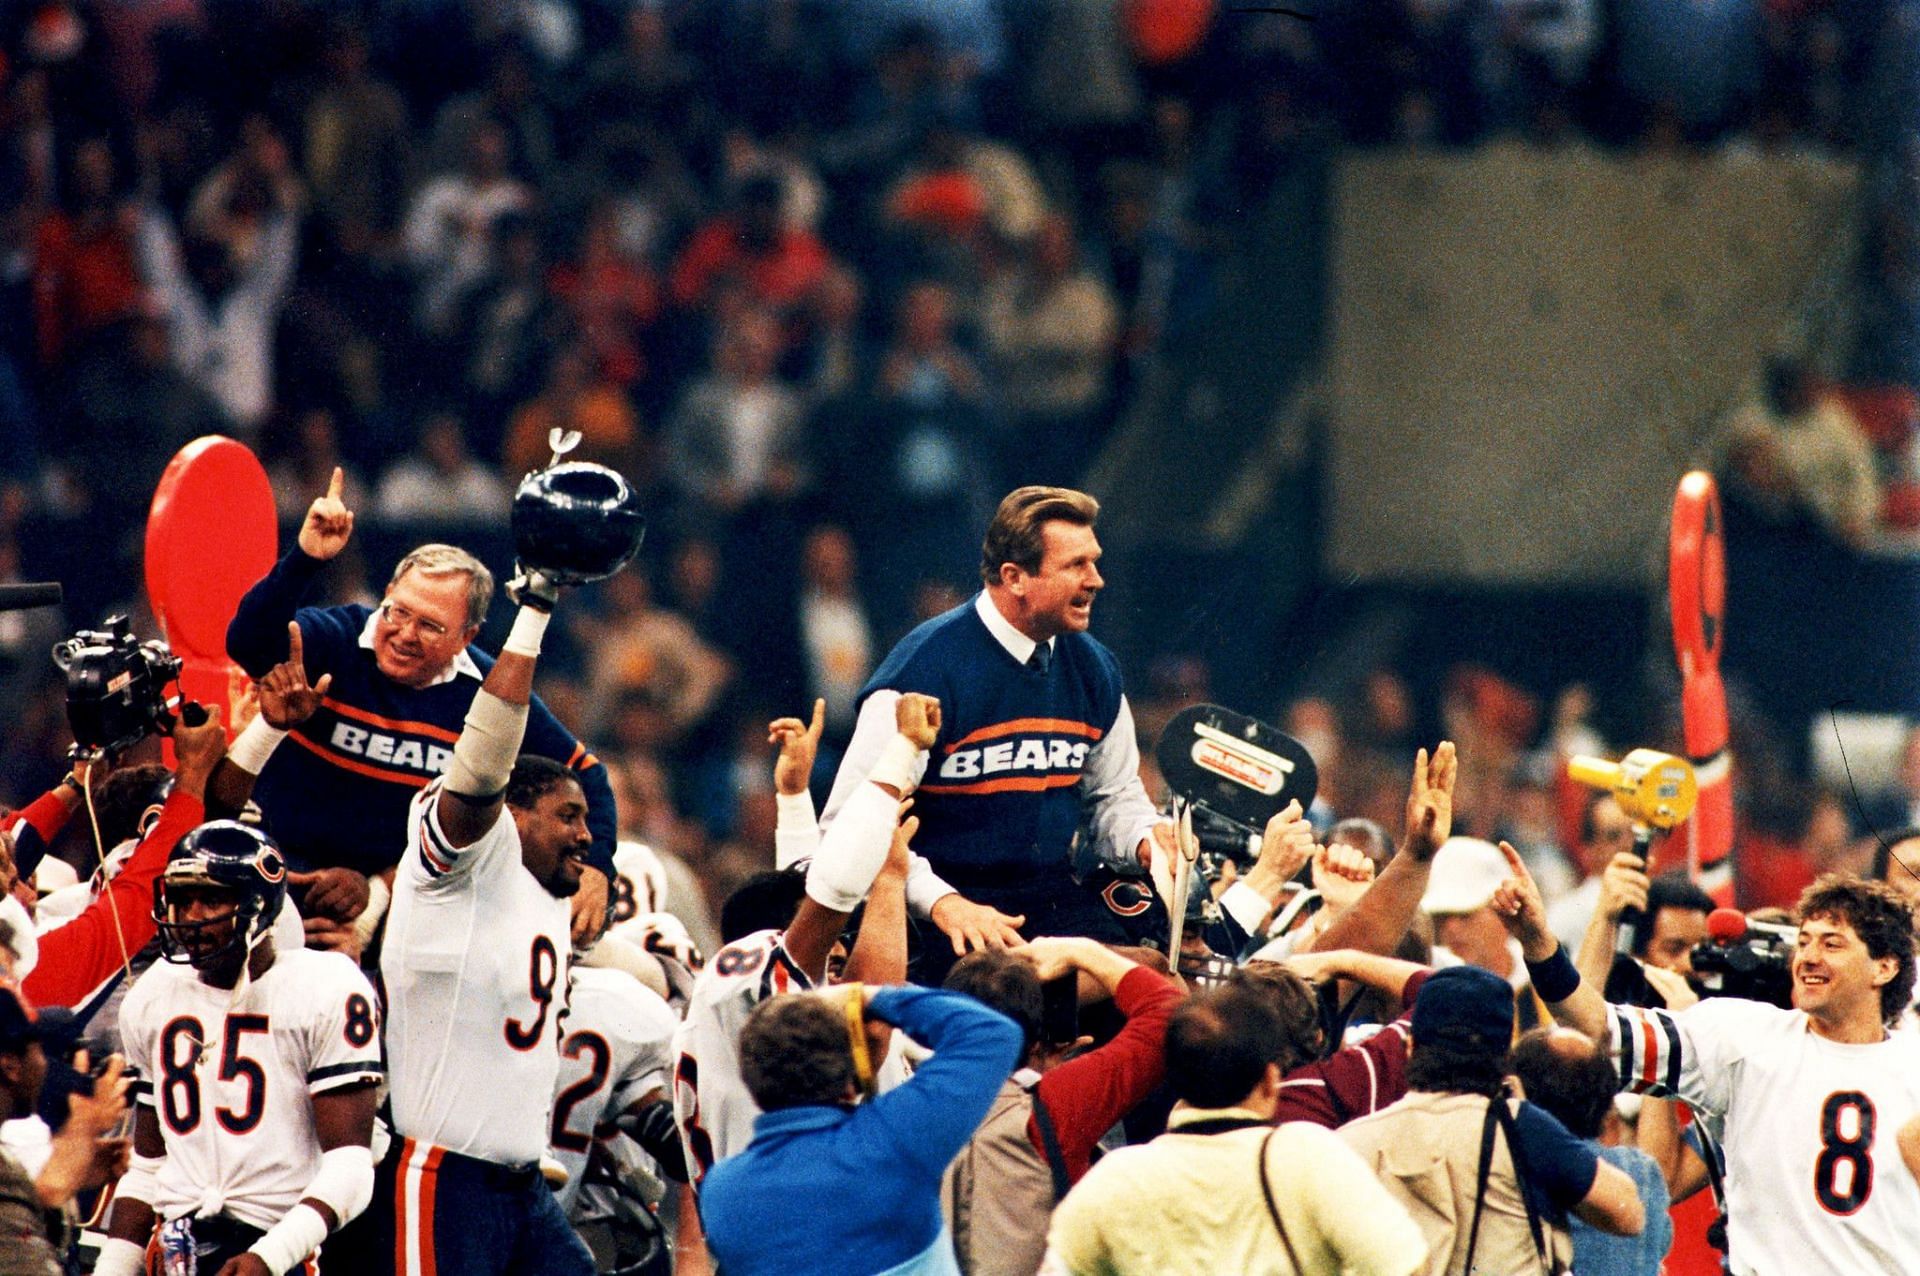 Mike Ditka after leading the Bears to Super Bowl XX